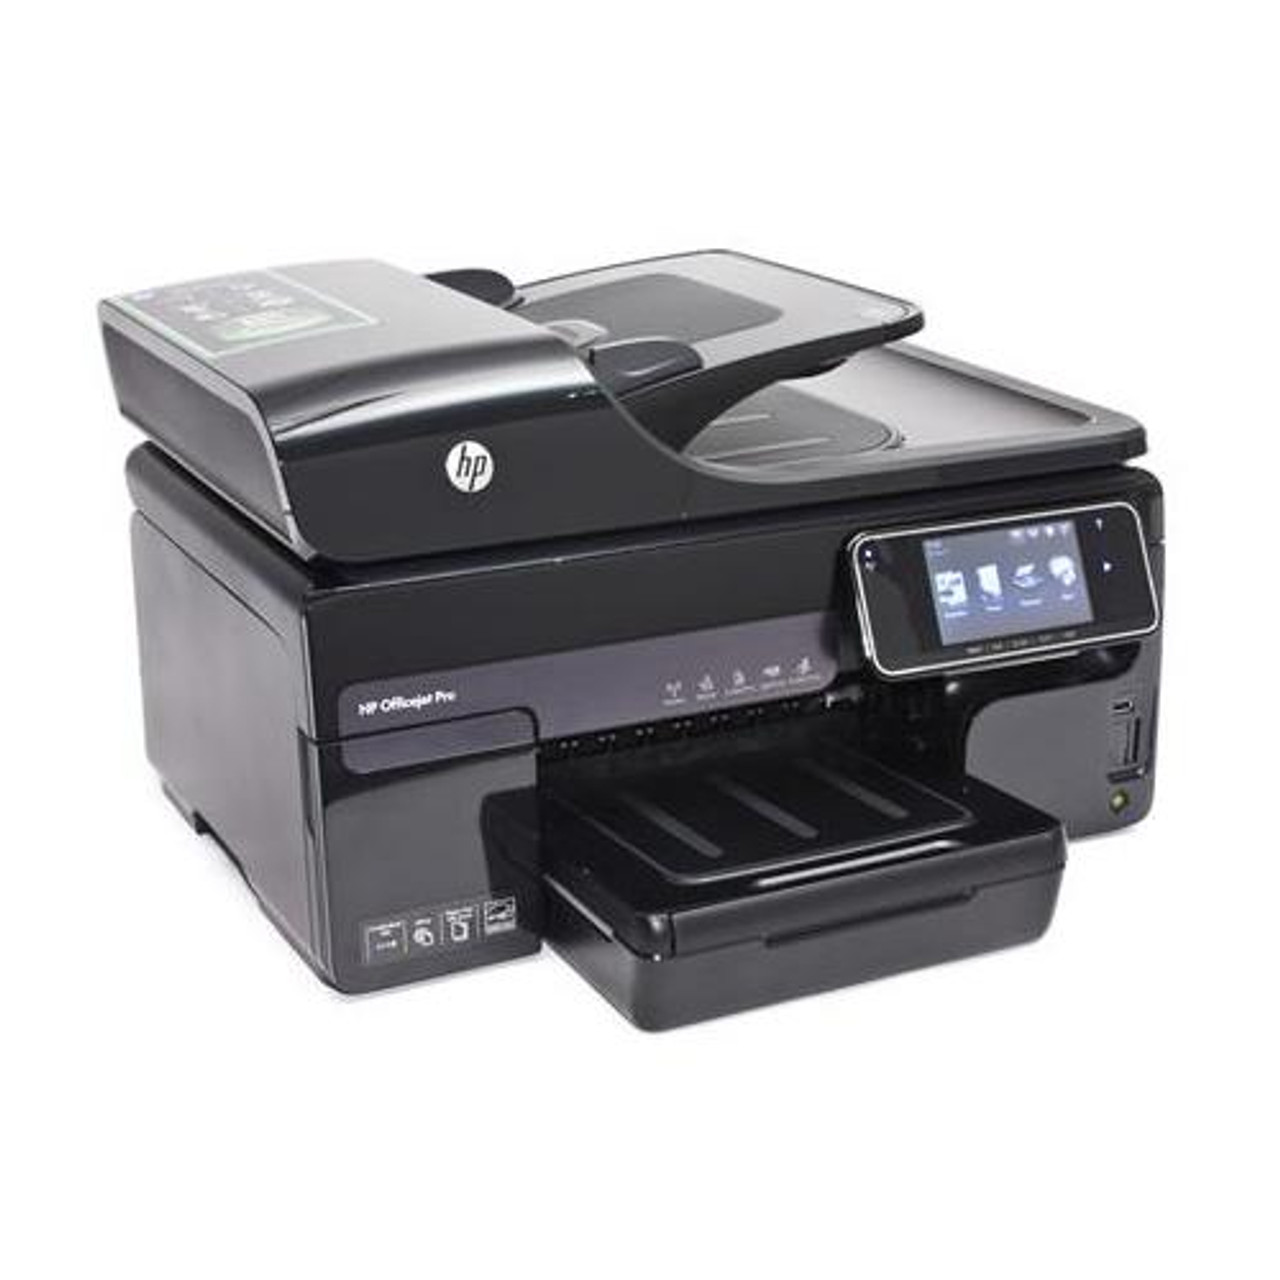 CM755A - HP OfficeJet Pro 8500A All-in-One Colour Printer A910a (Print/Copy/Scan/Fax/Web) 64MB 35ppm (Mono) 34ppm (Colour) 250 Sheet Input Tray